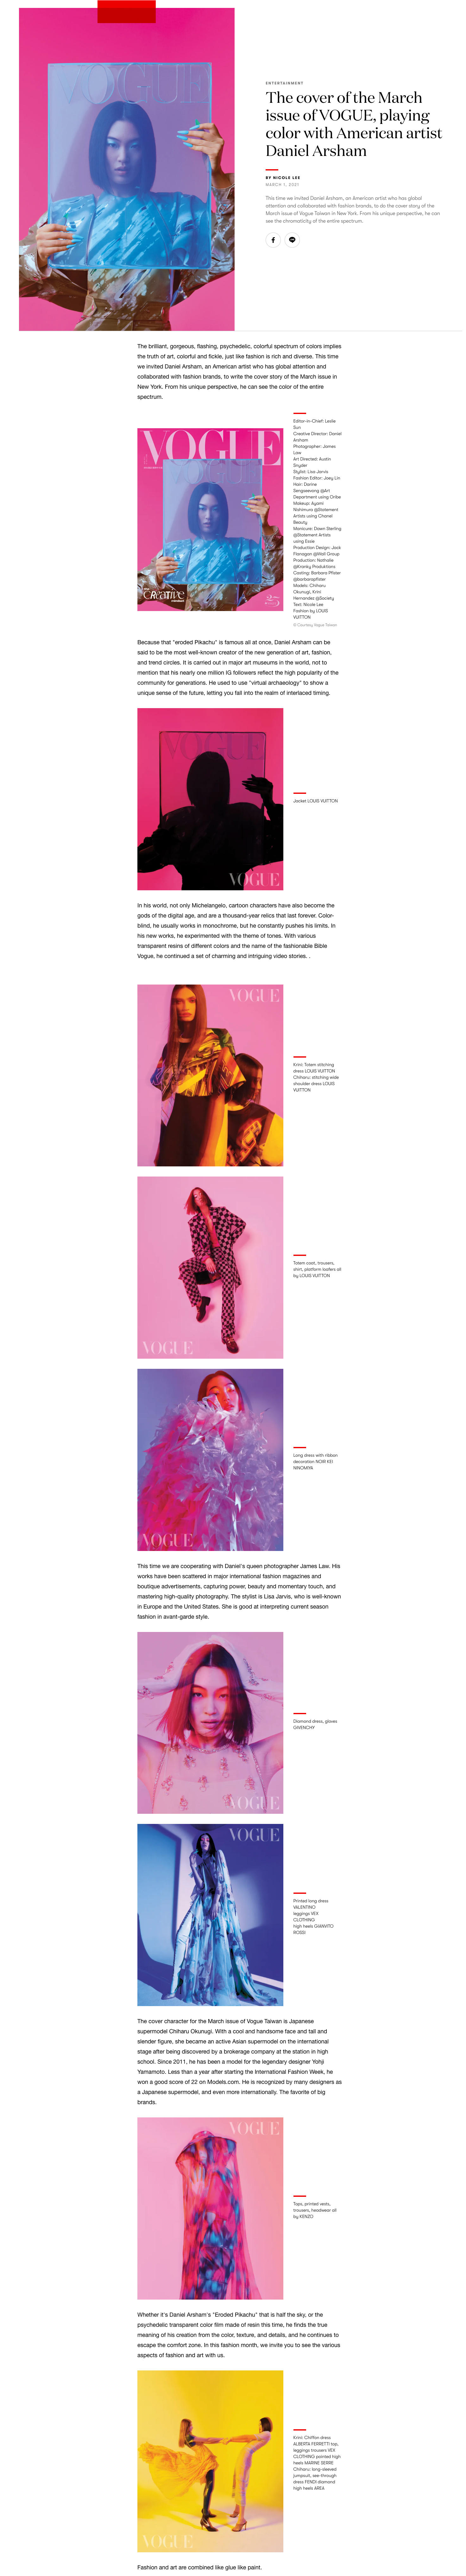 Vogue Taiwan press clipping featuring several images with pink, blue and yellow hued filters and couture outfits